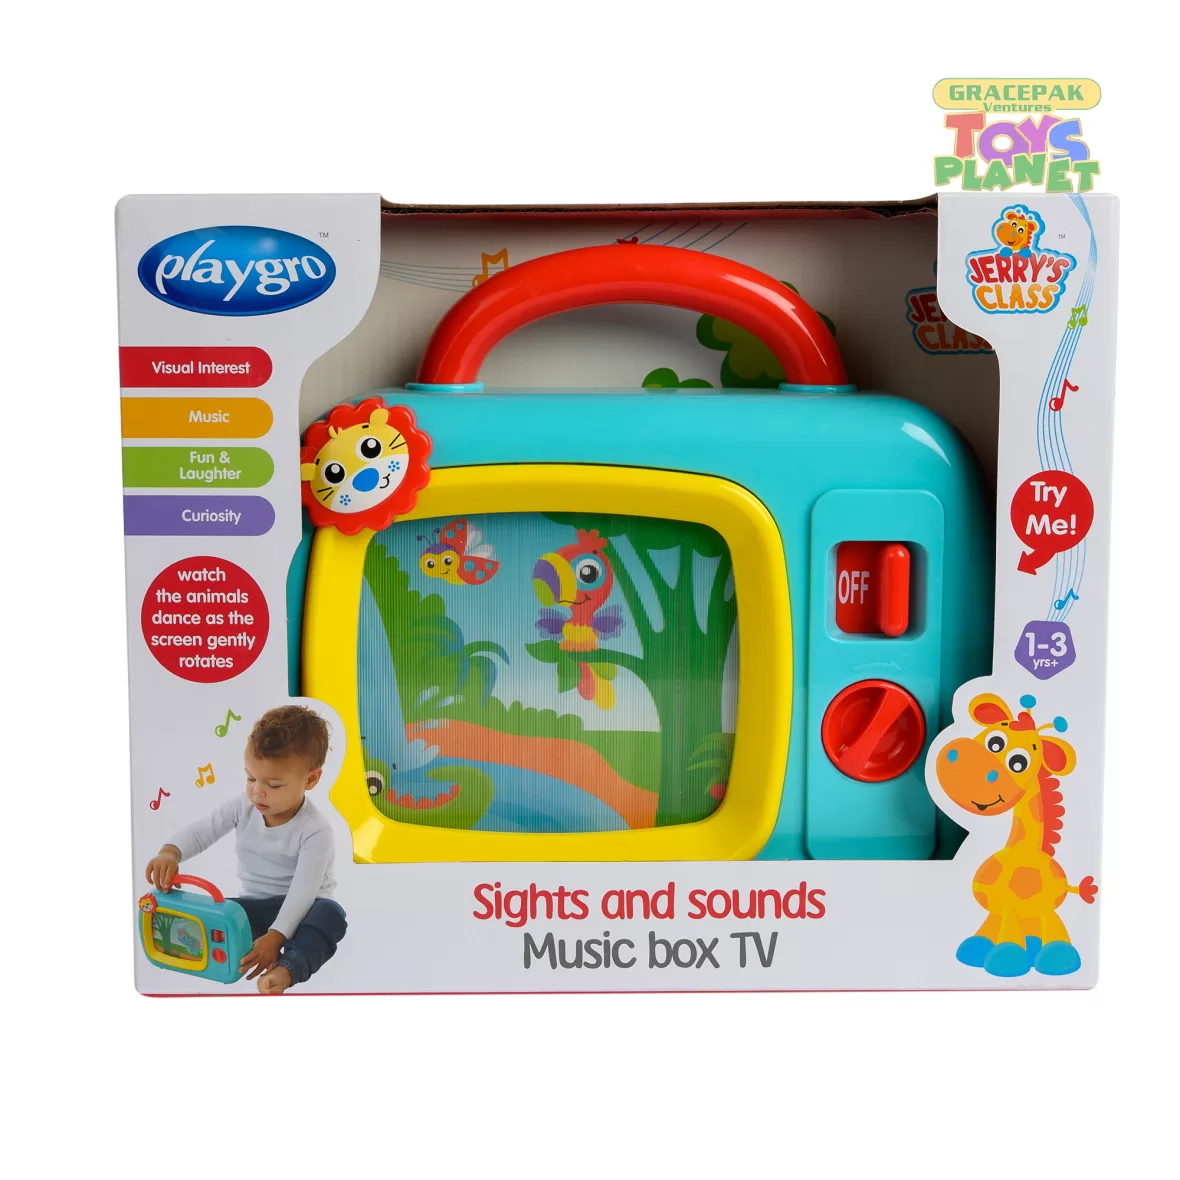 Sights And Sounds Music Box TV